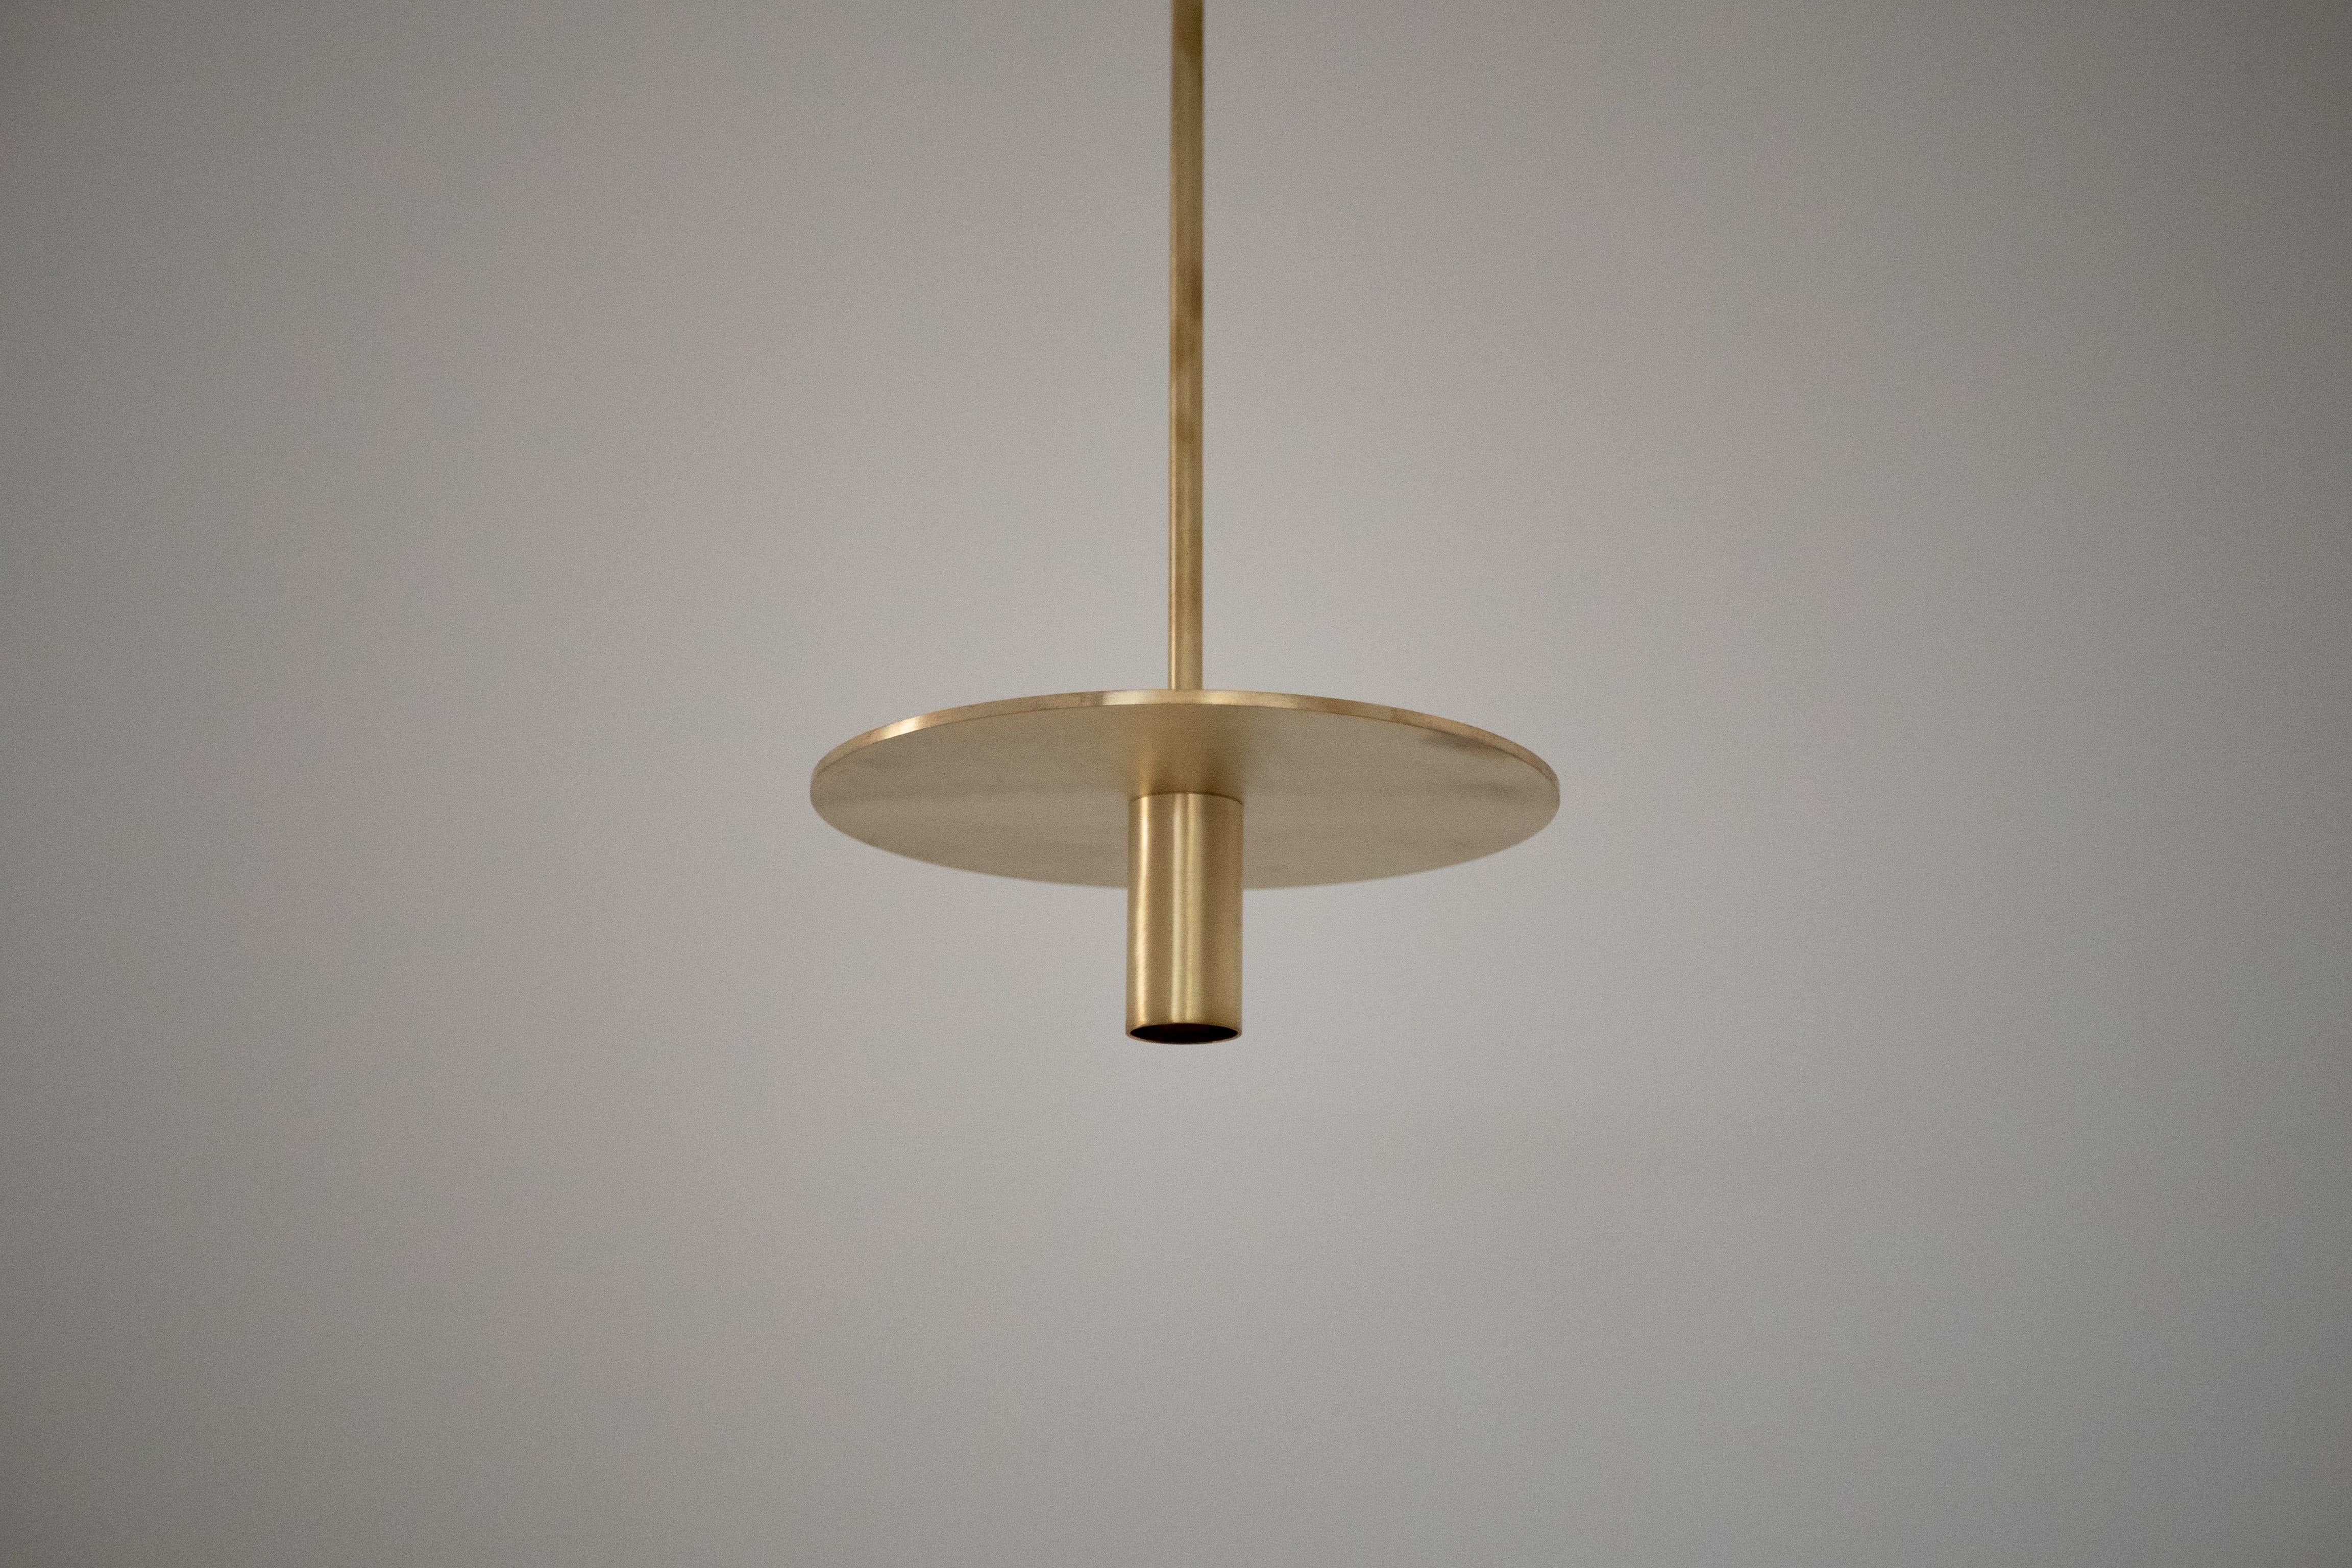 Italian Natural Brass Contemporary-Modern Ceiling Light Handcrafted in Italy For Sale